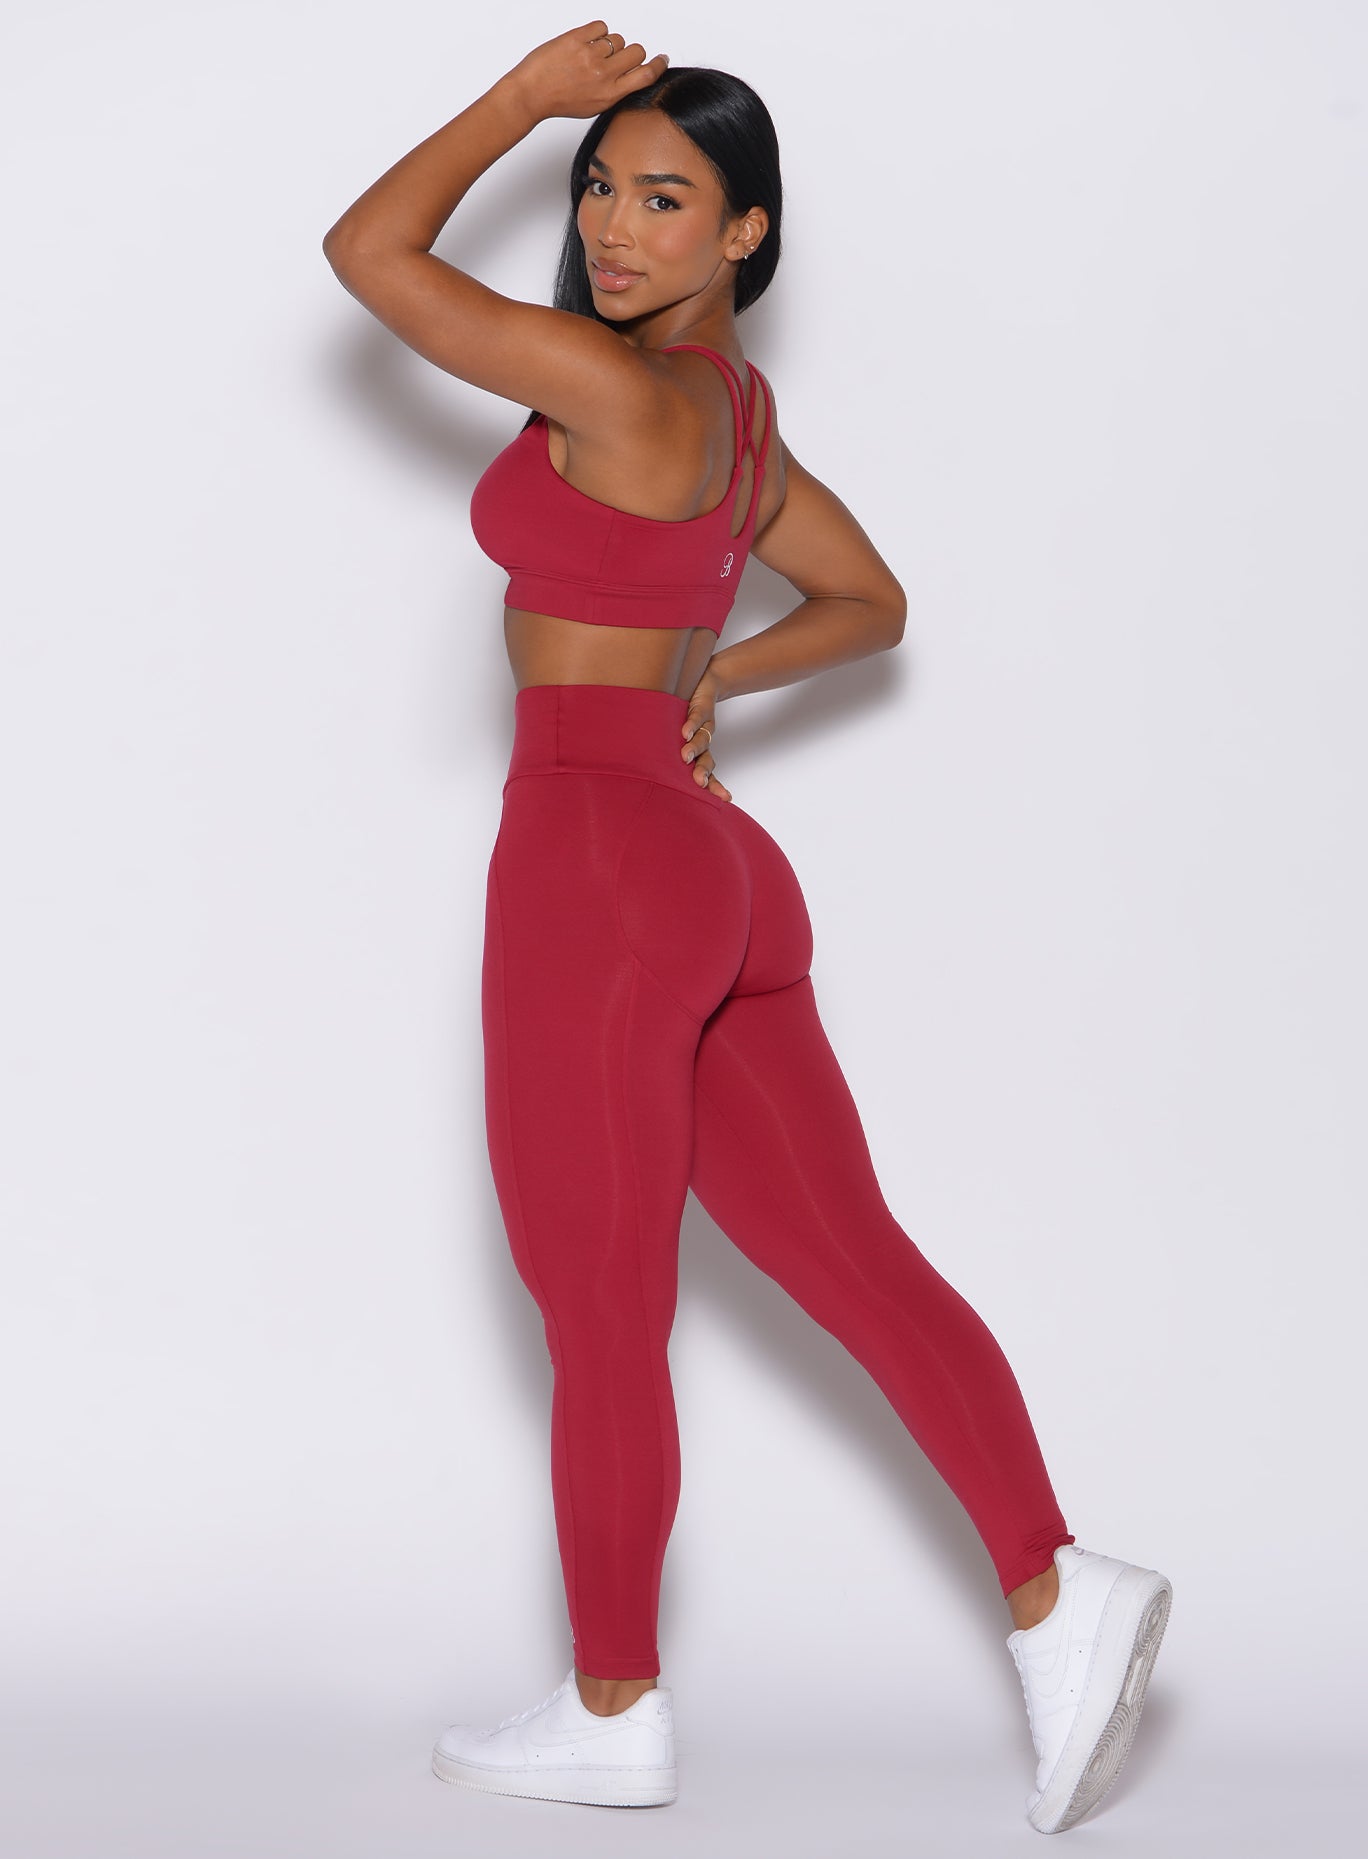 Left side profile view of a model wearing our shape leggings in maroon color along with the matching bra